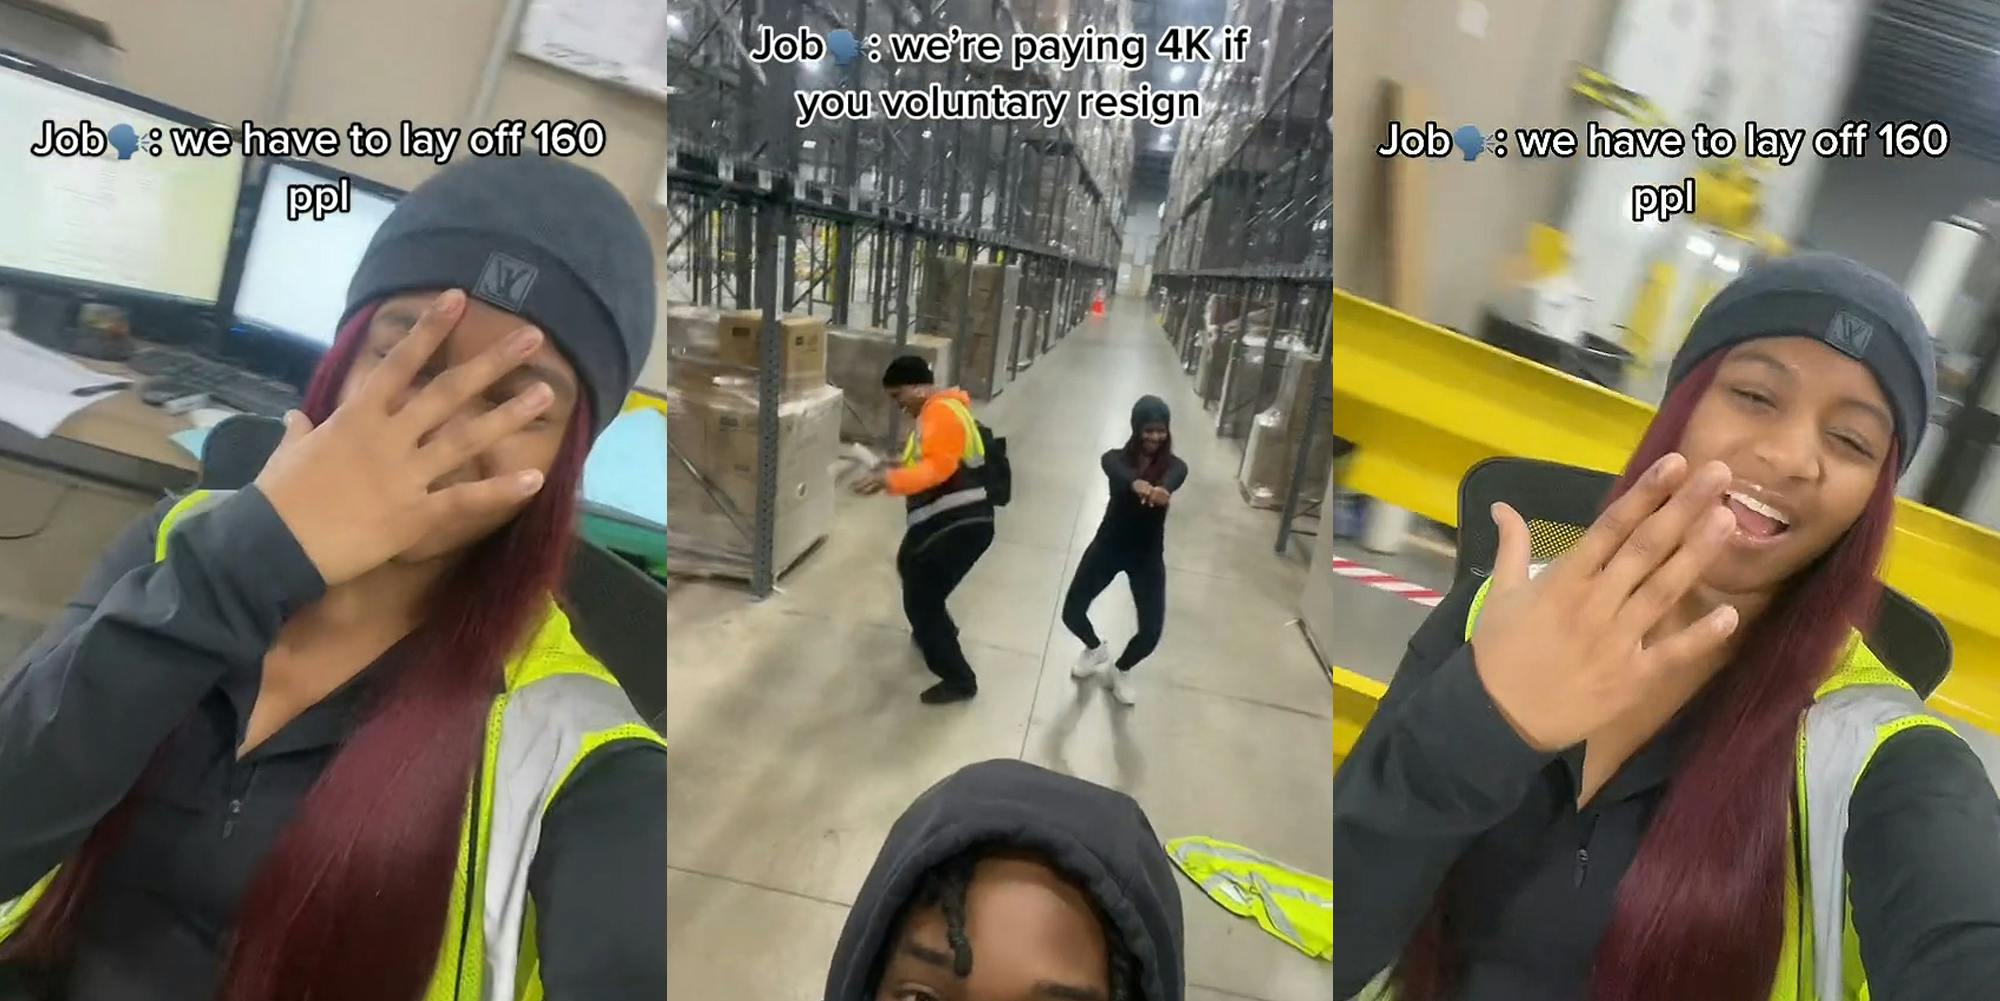 worker with hand on face caption "Job: we have to lay off 160 ppl" (l) workers dancing caption "Job: we're paying 4k if you voluntary resign" (c) worker with hand up to face caption "Job: we have to lay off 160 ppl" (r)